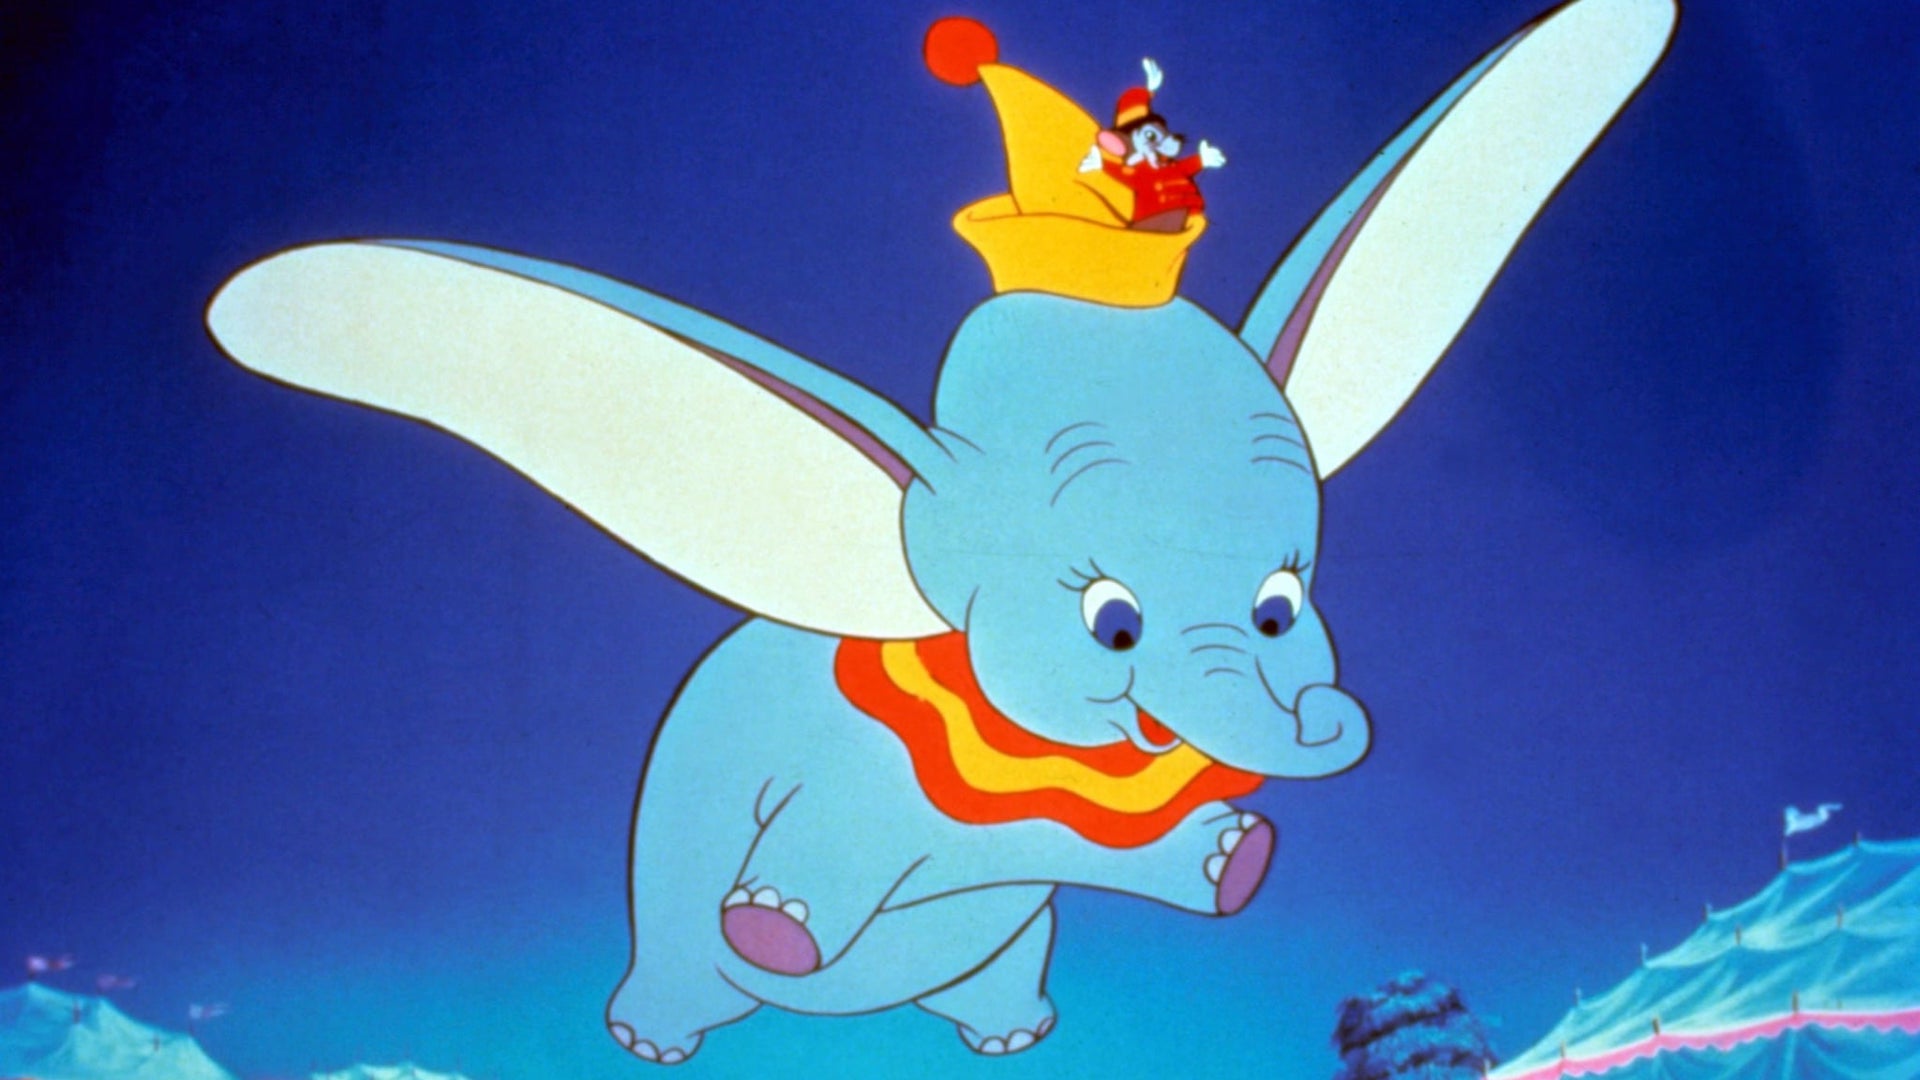 A scene from Dumbo